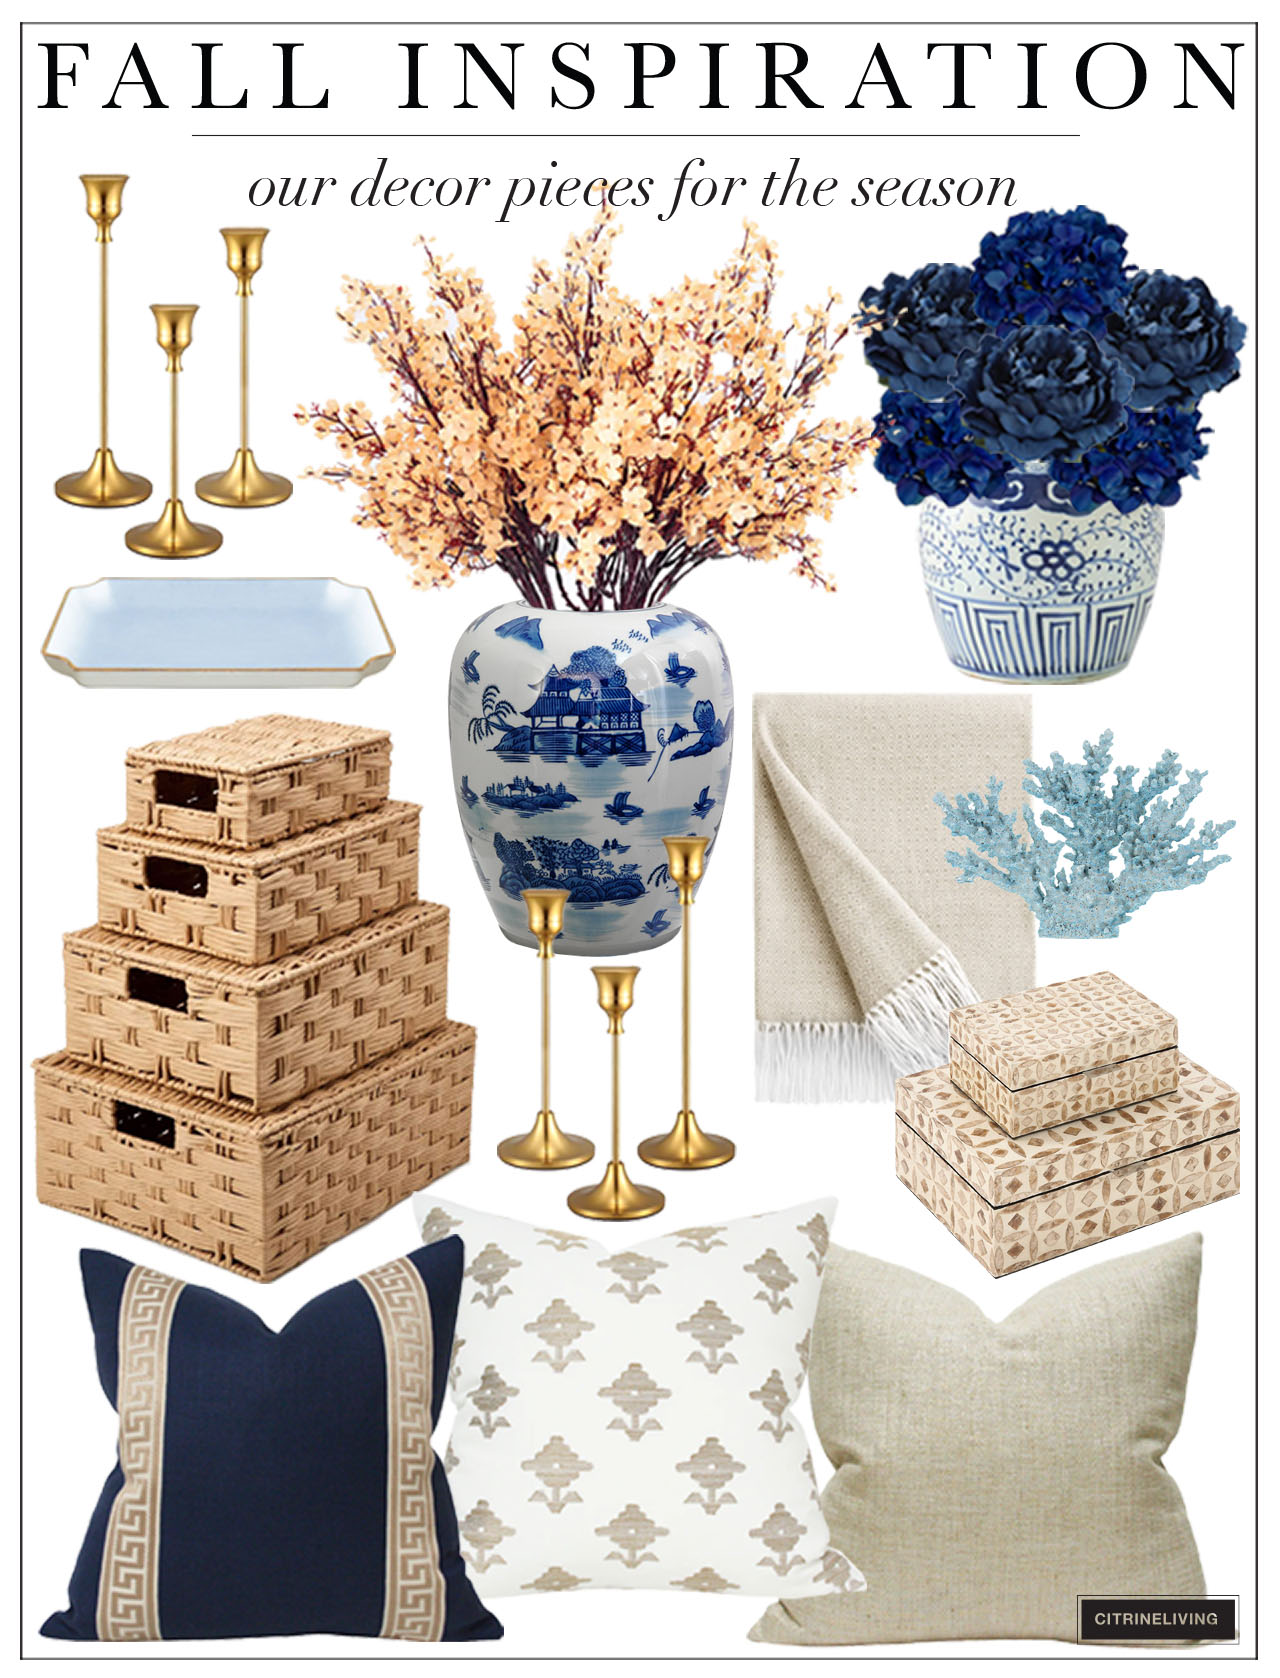 Fall decor in blue and white chinoiserie, beige, coastal elements, woven baskets, gold candlesticks, and blue and beige florals.